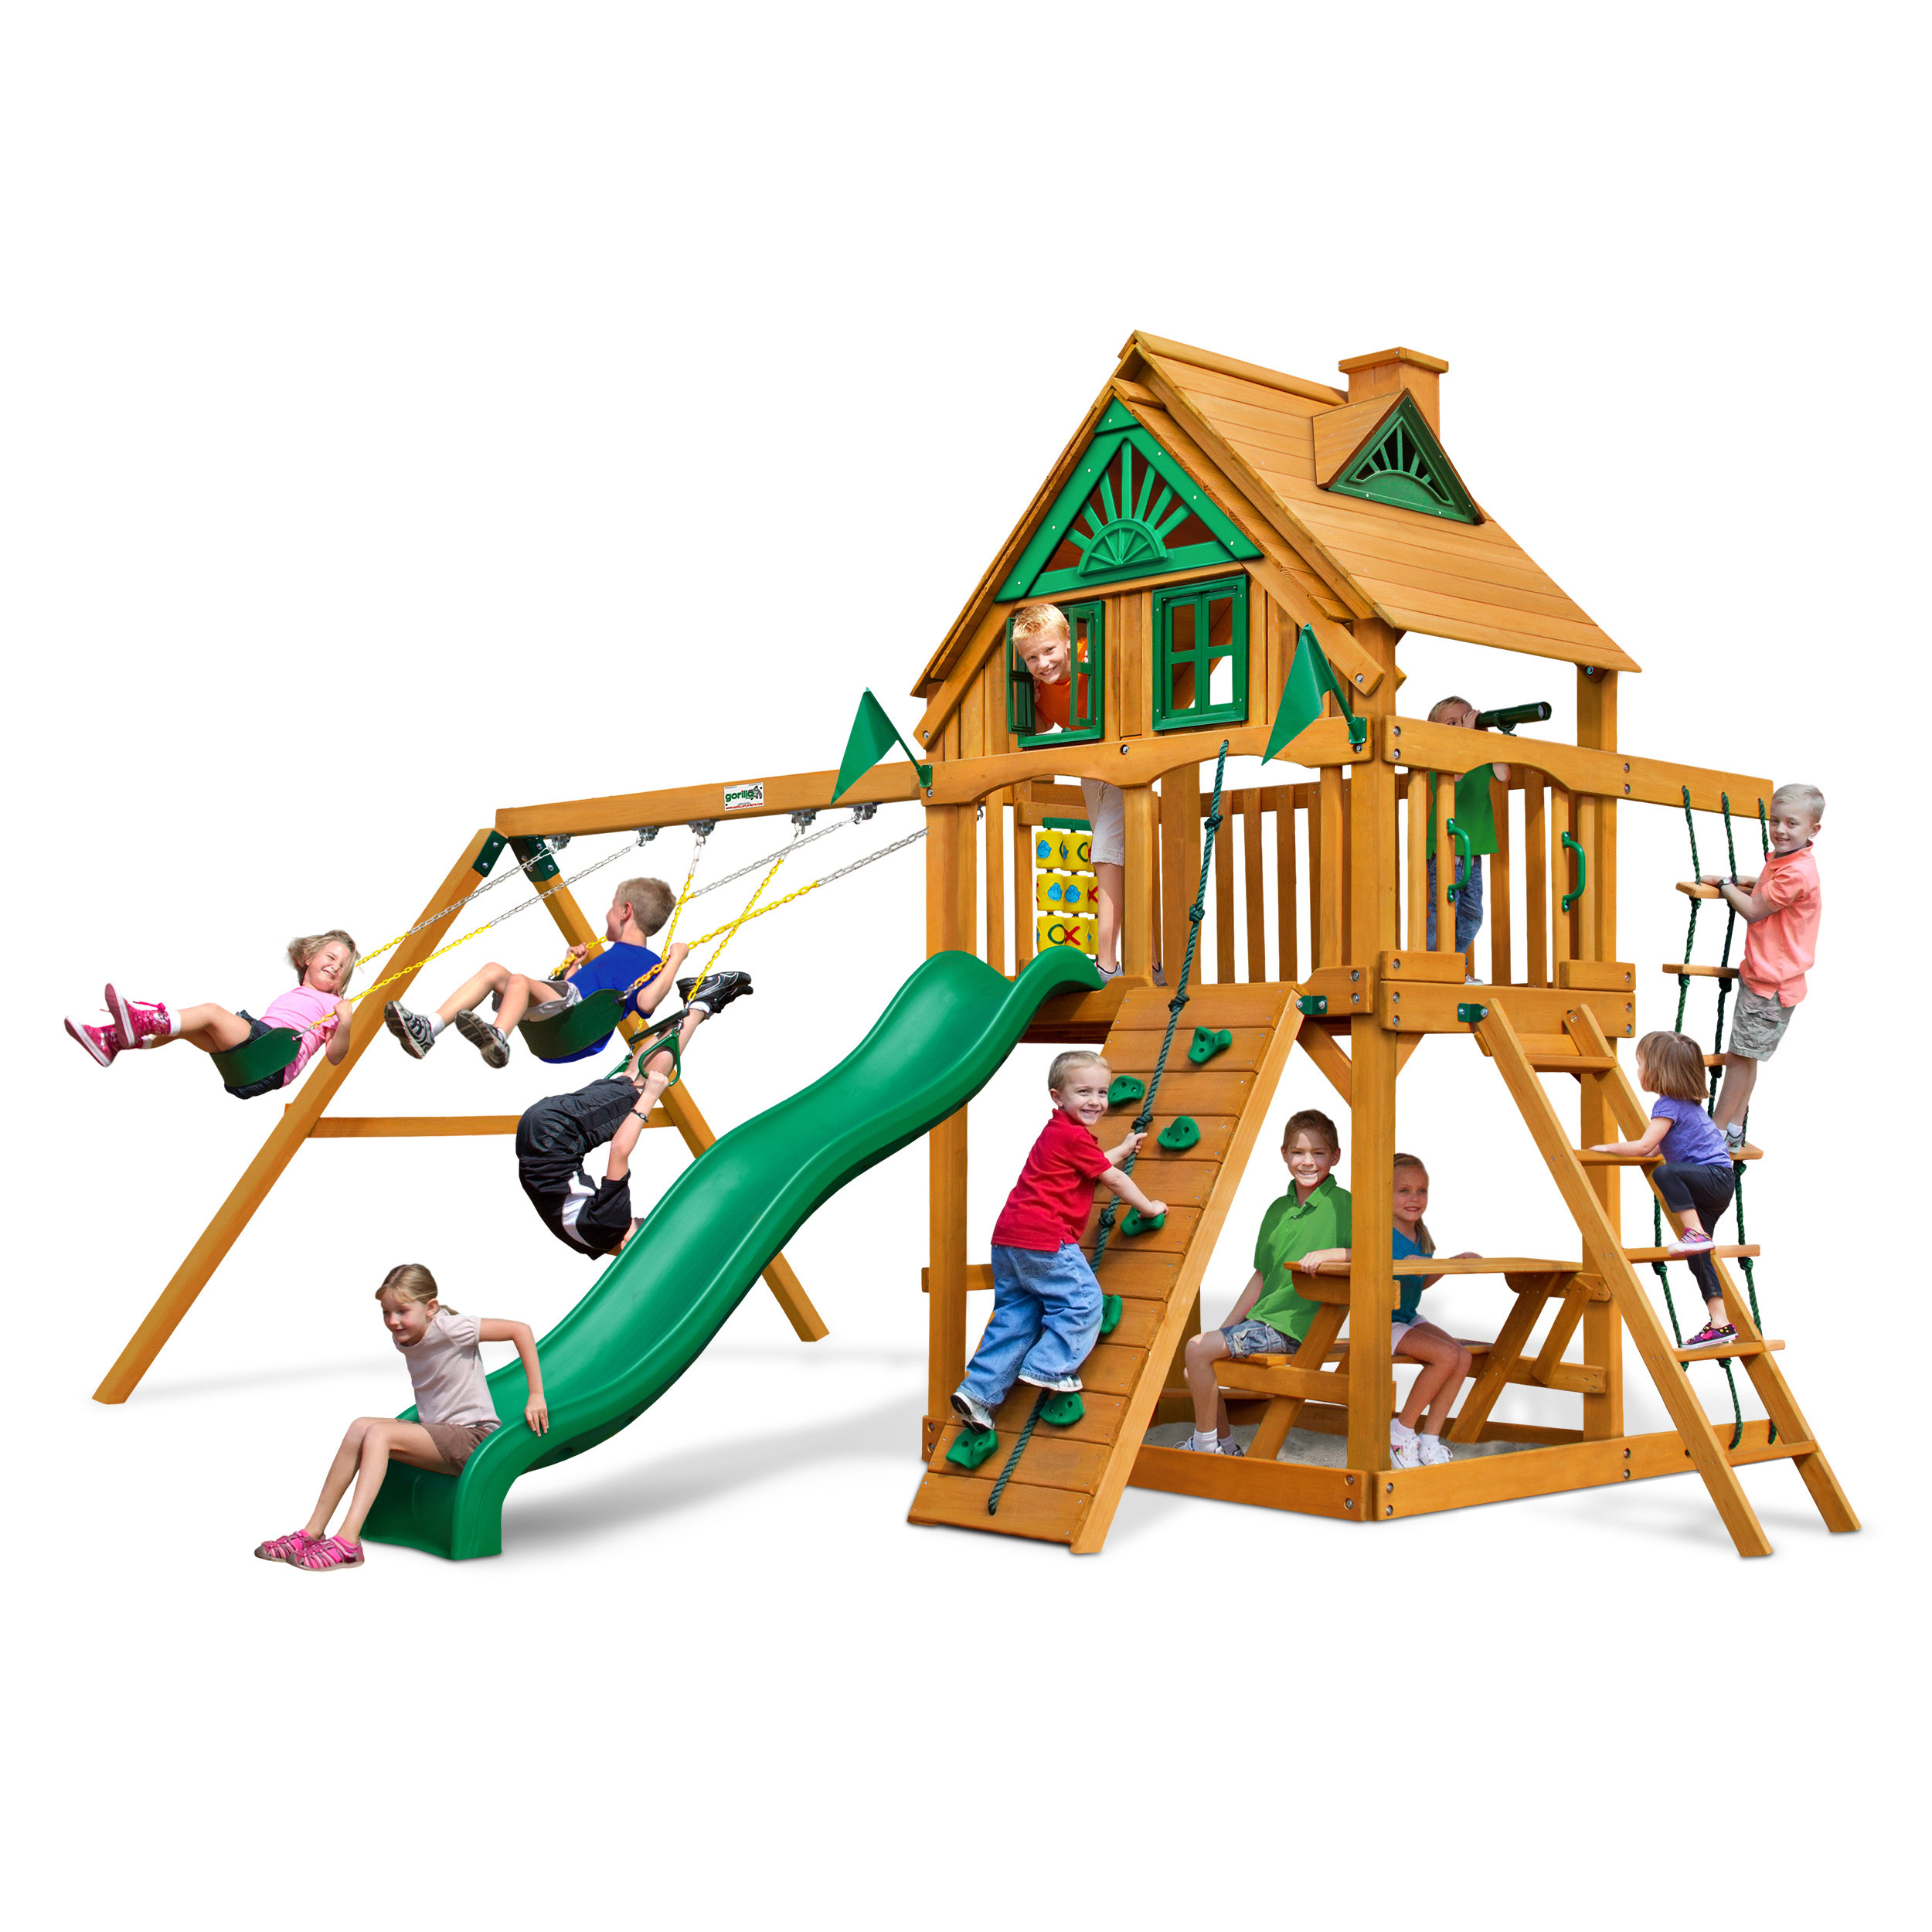 Gorilla Playsets Chateau Treehouse Swing Set with Amber Posts